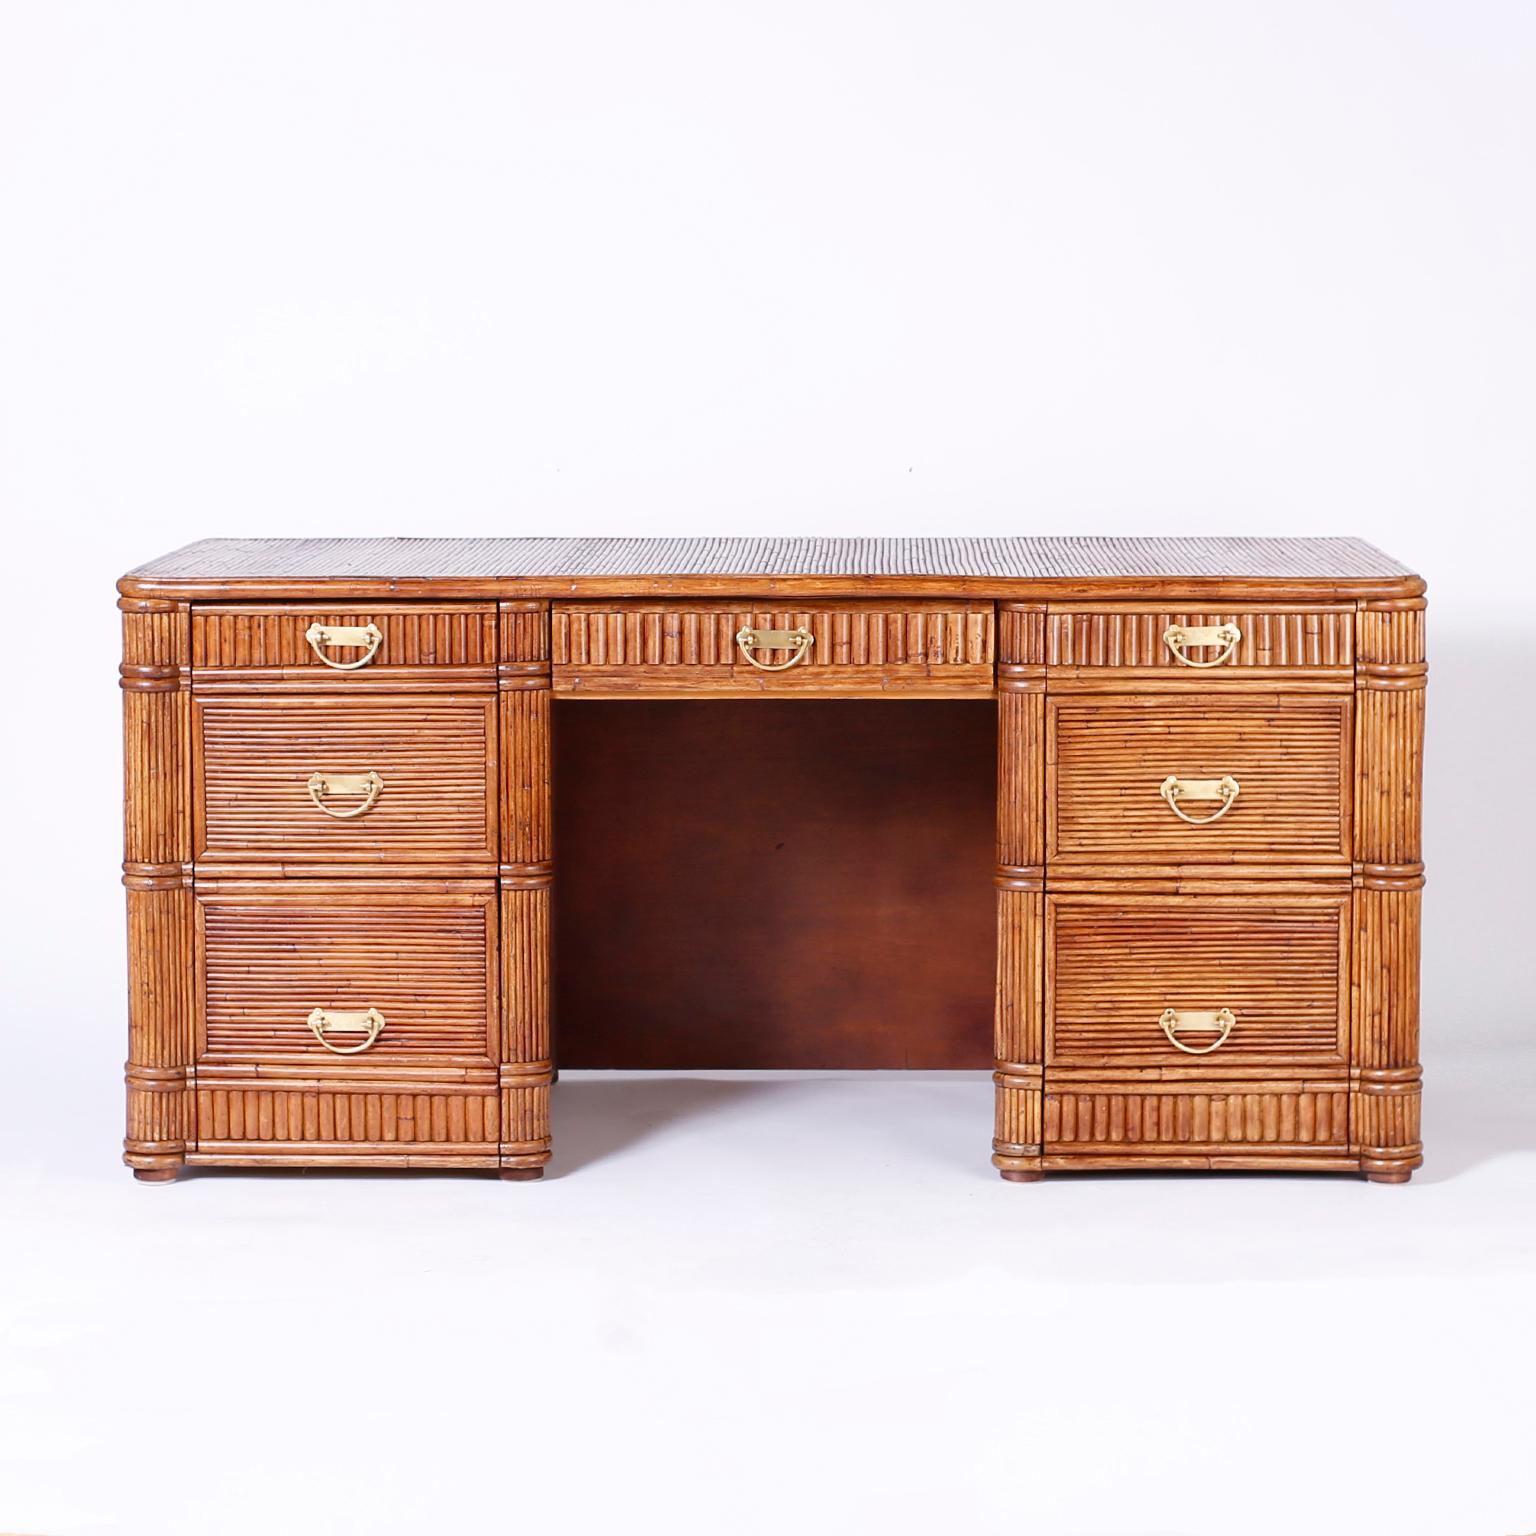 Seven drawer desk crafted in pencil reed featuring flowing wave patterns on the sides and back over a classic case, making this desk the perfect marriage of modern design and traditional form.